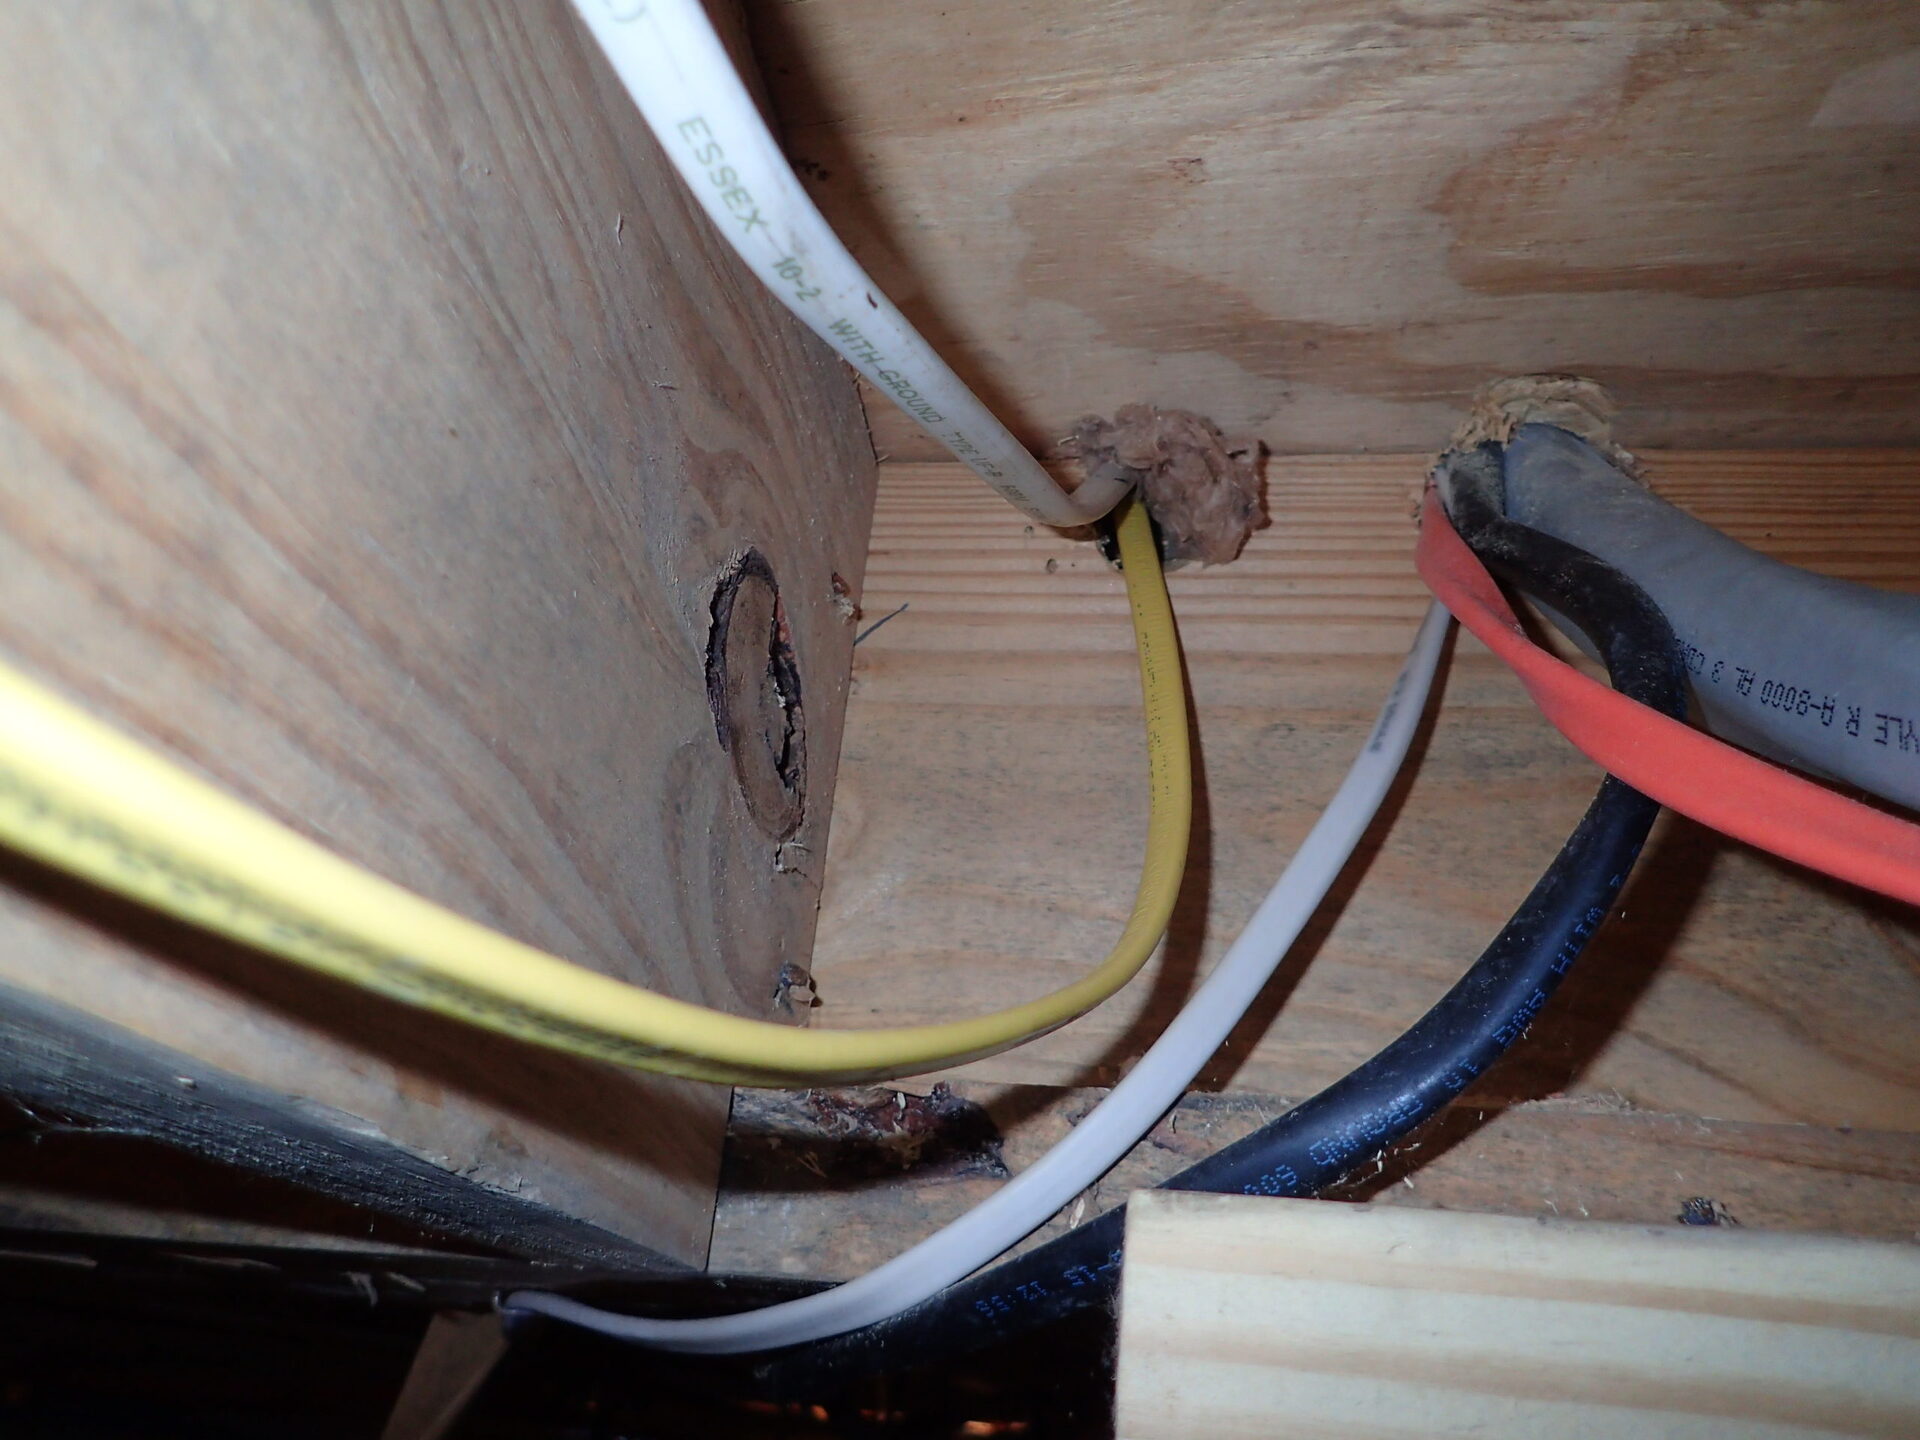 What Is The Minimum Bend Radius For An Electrical Wire Bundle?